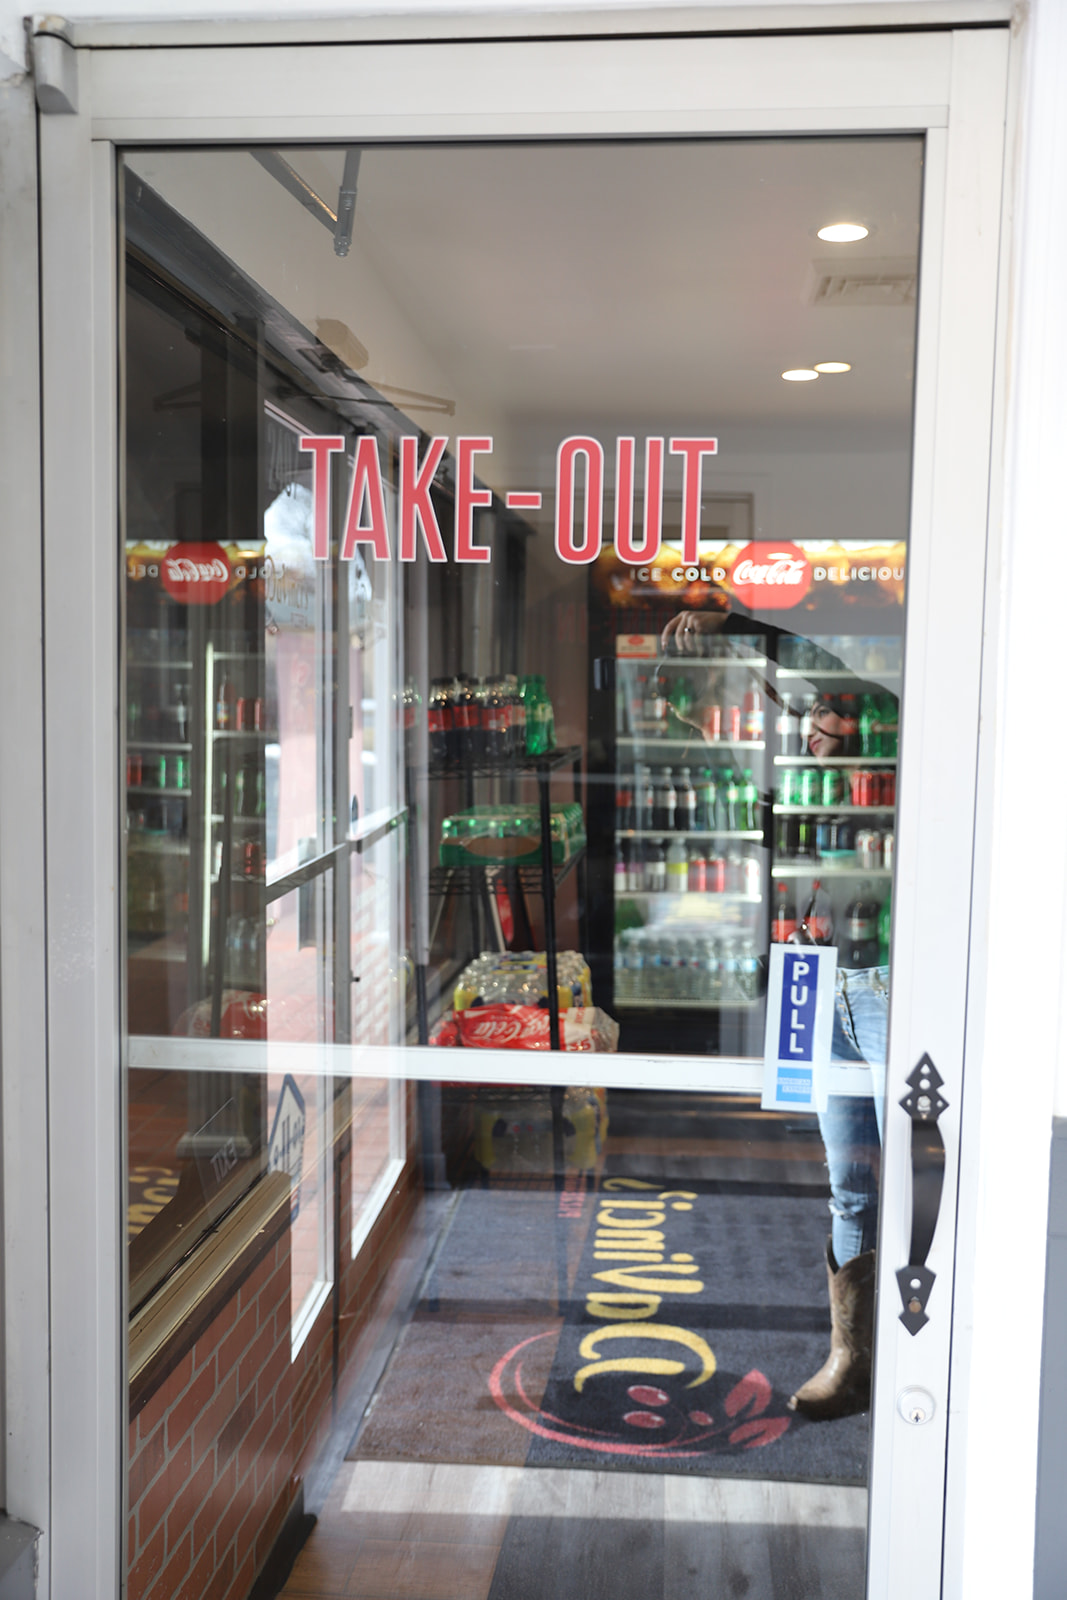 take-out sign on door